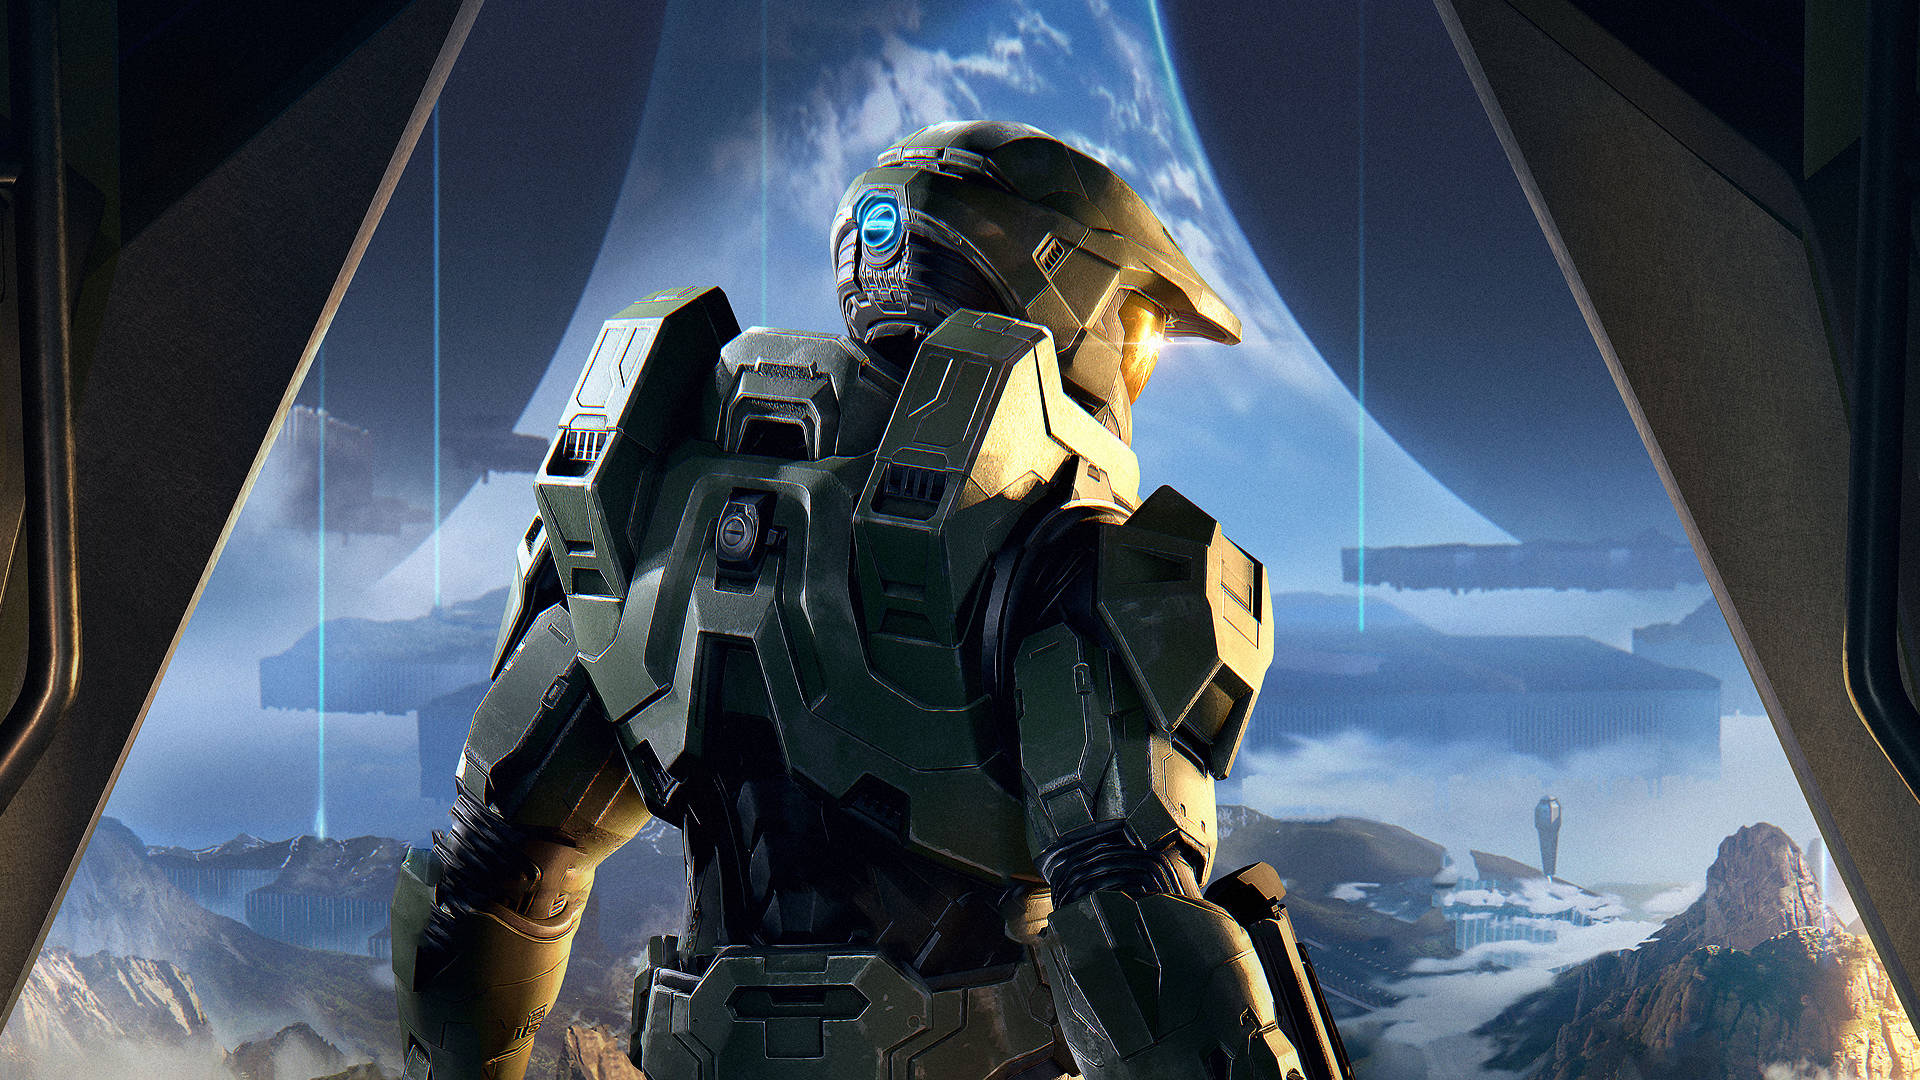 Halo Infinite, 343 Industries hit by the wave of layoffs: "Halo is not risk"